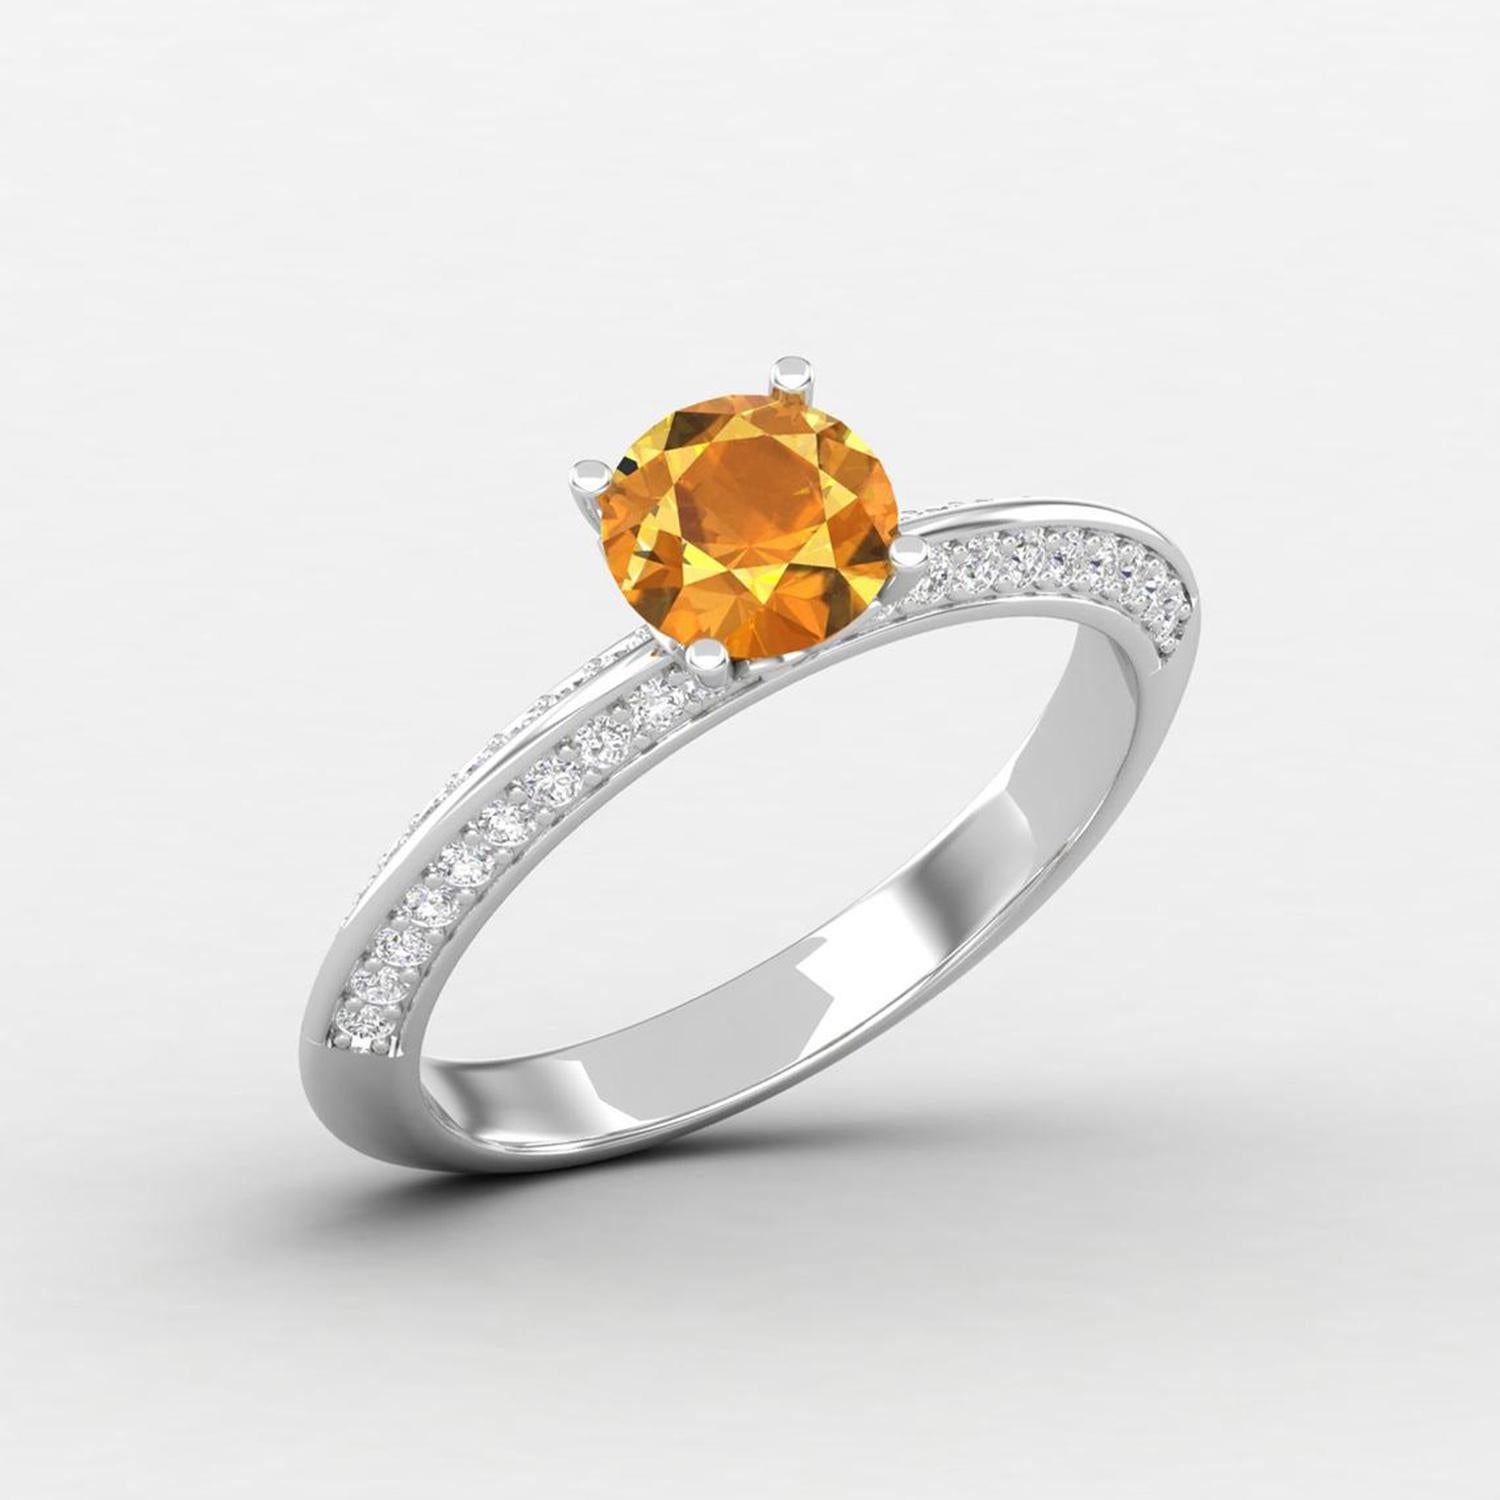 Round Cut 14 K Gold Yellow Citrine Ring / Diamond Solitaire Ring / Engagement Ring for Her For Sale